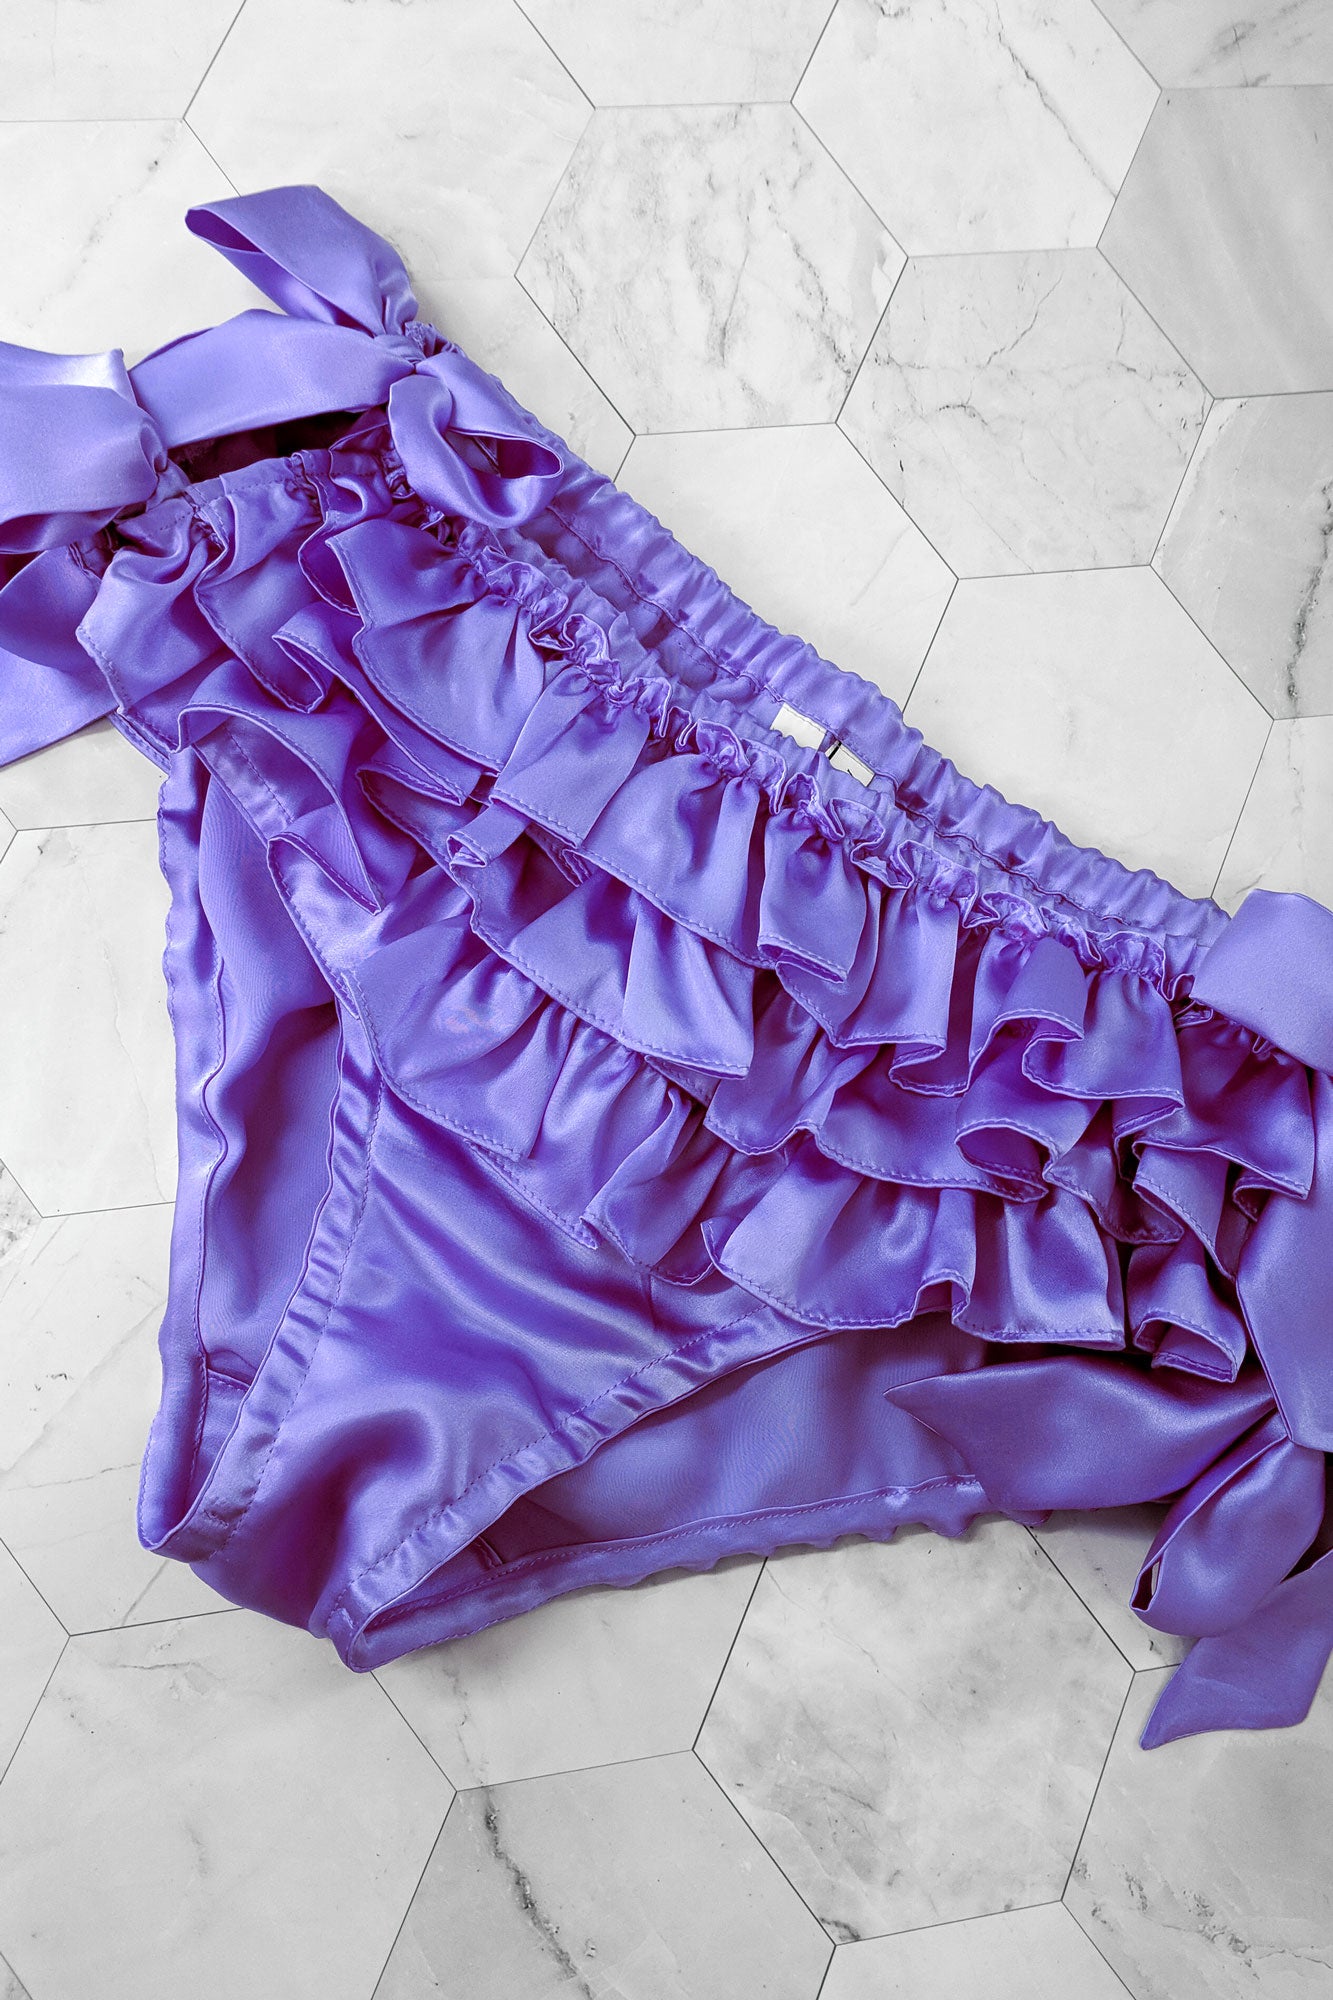 Silk knickers can be custom made in - Buttress & Snatch